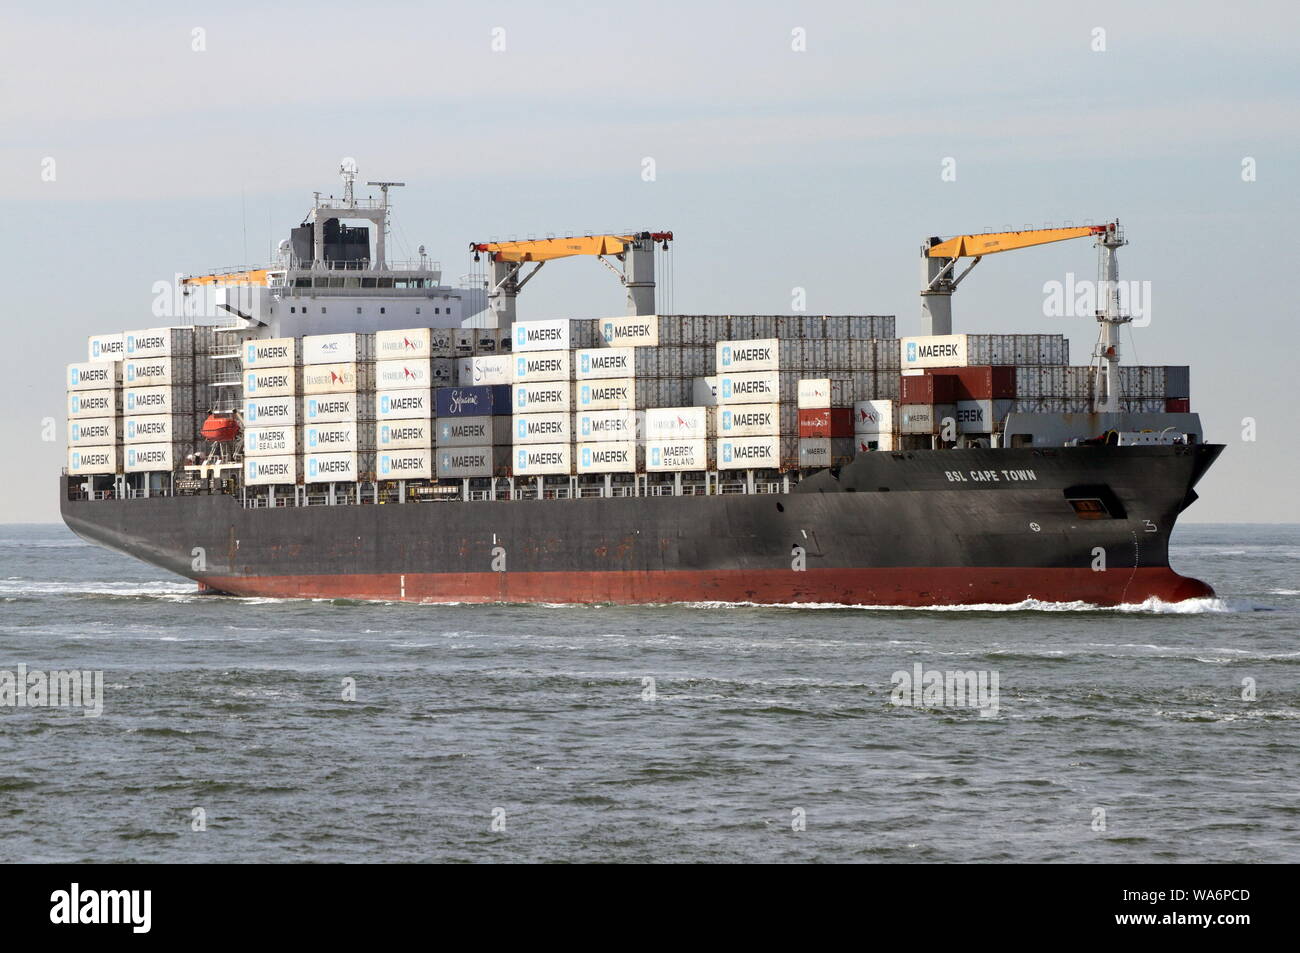 The container ship BSL Cape Town reaches the port of Rotterdam on May 22, 2019. Stock Photo